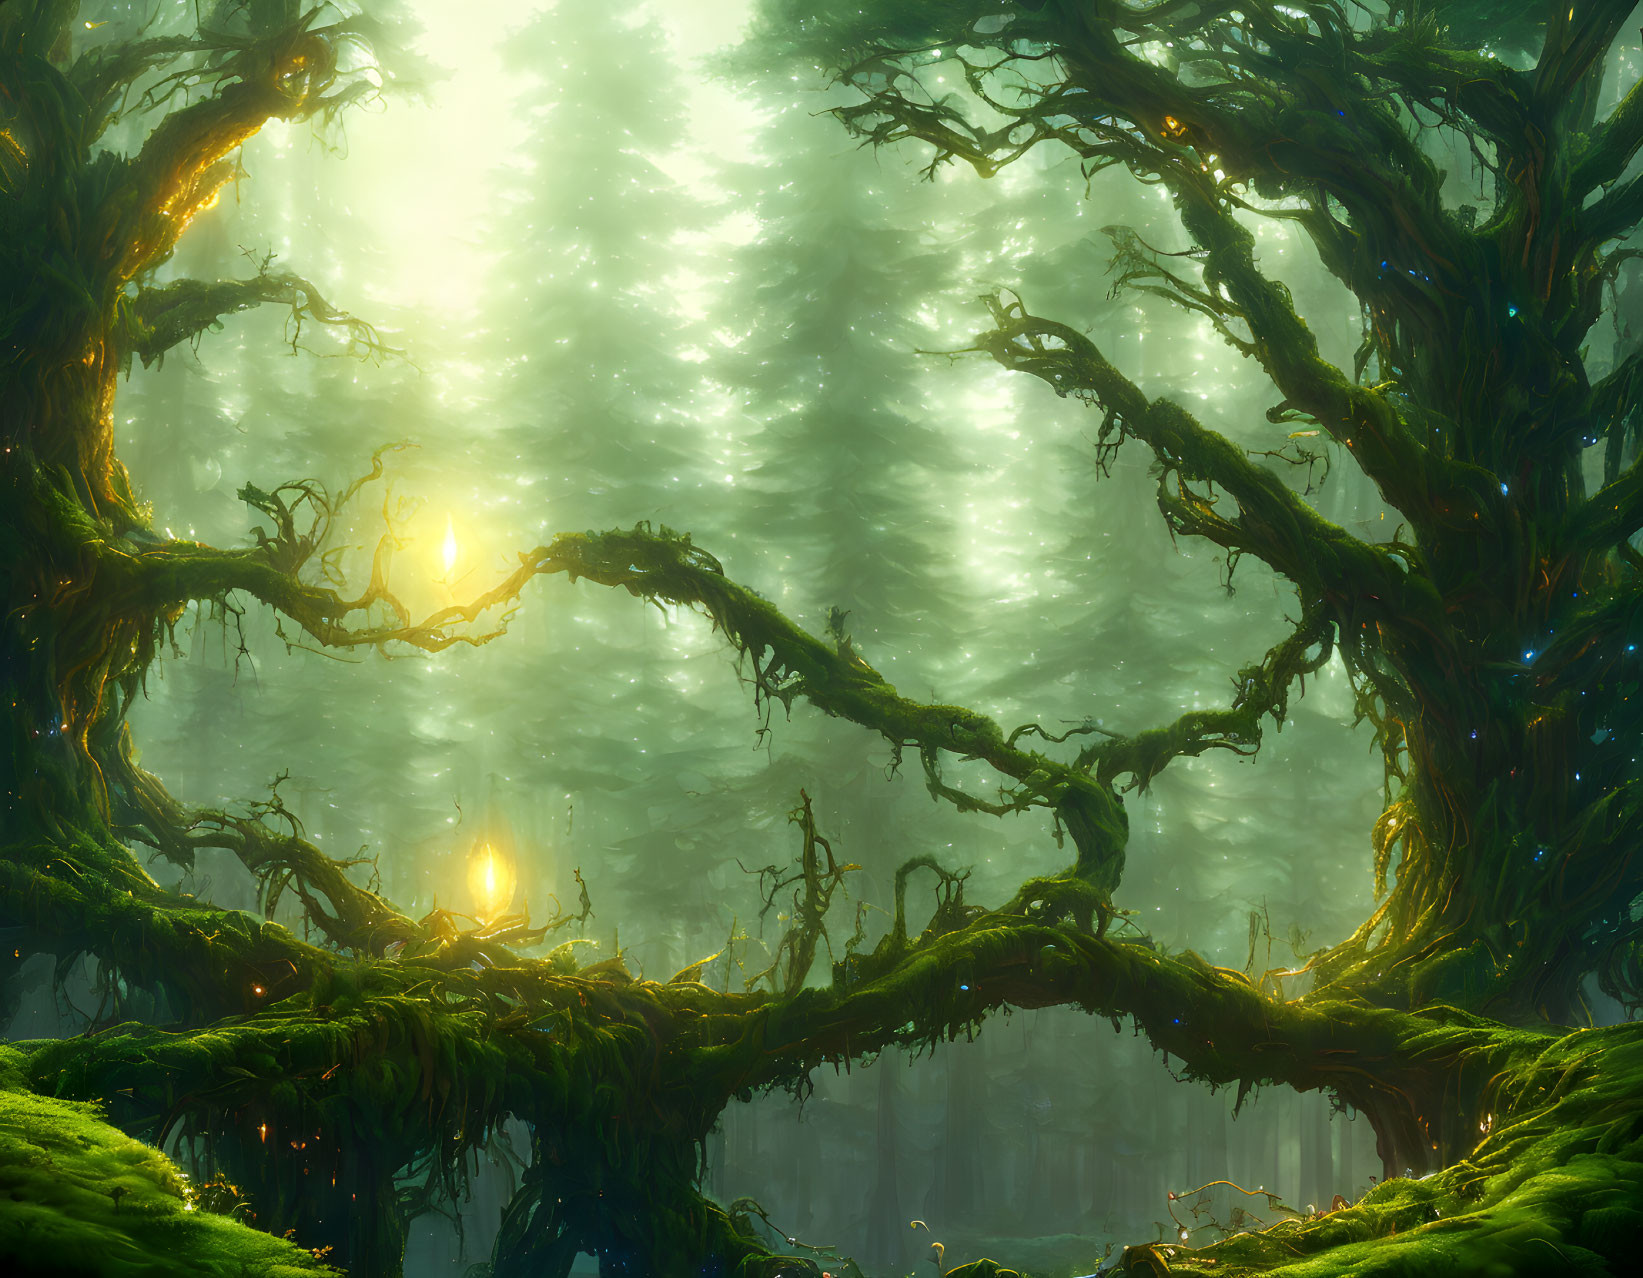 Sunlit enchanted forest with dense trees, twisted branches, and green moss.